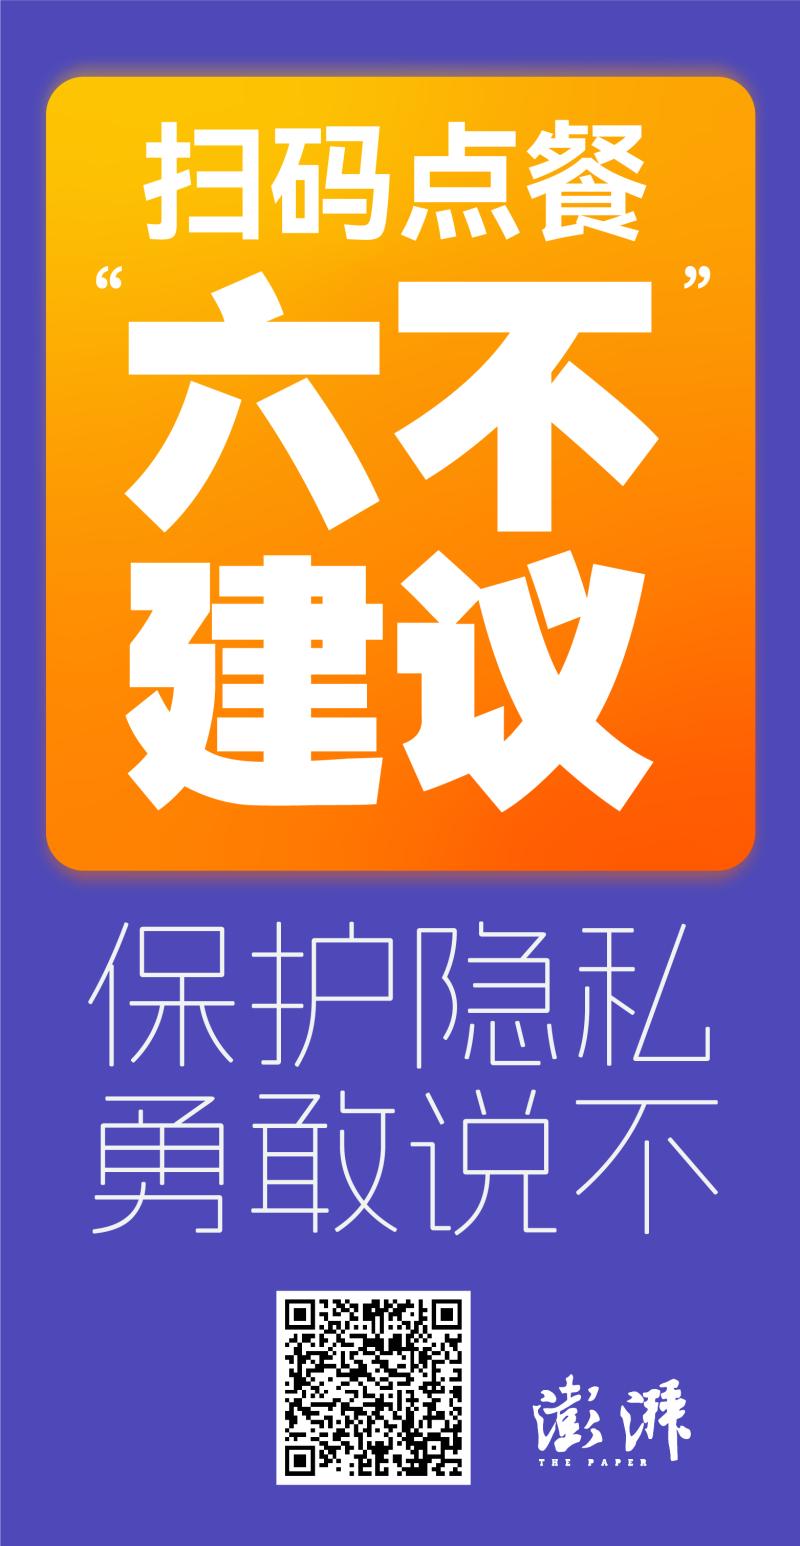 Be brave and say no! The Shanghai Cyberspace Administration has proposed the "Six Don'ts" for personal information protection when scanning QR codes to order meals. Consumers | Personal Information | Shanghai